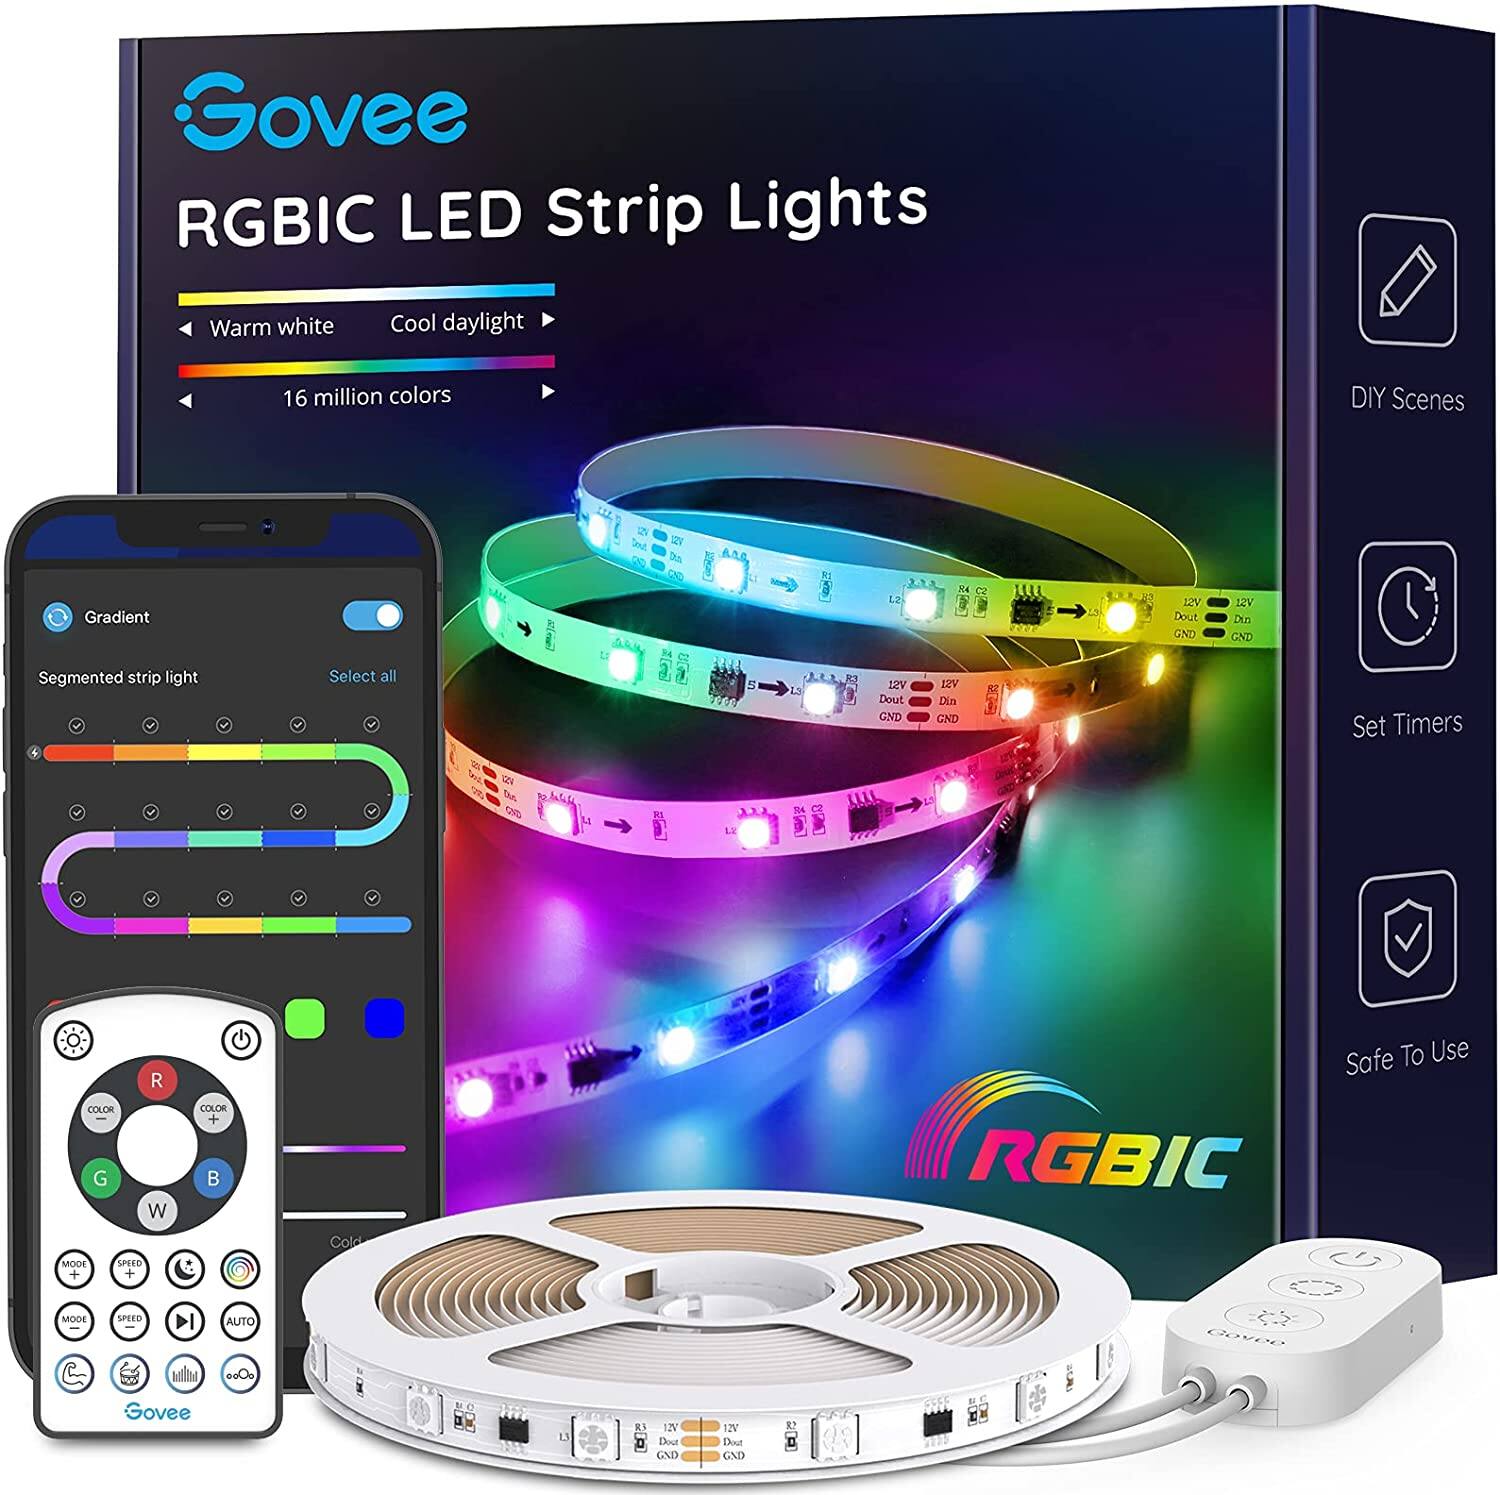 Govee 16.4ft RGBIC Bluetooth LED Strip Lights - $17.57 + Free Shipping w/ Prime or orders $25+